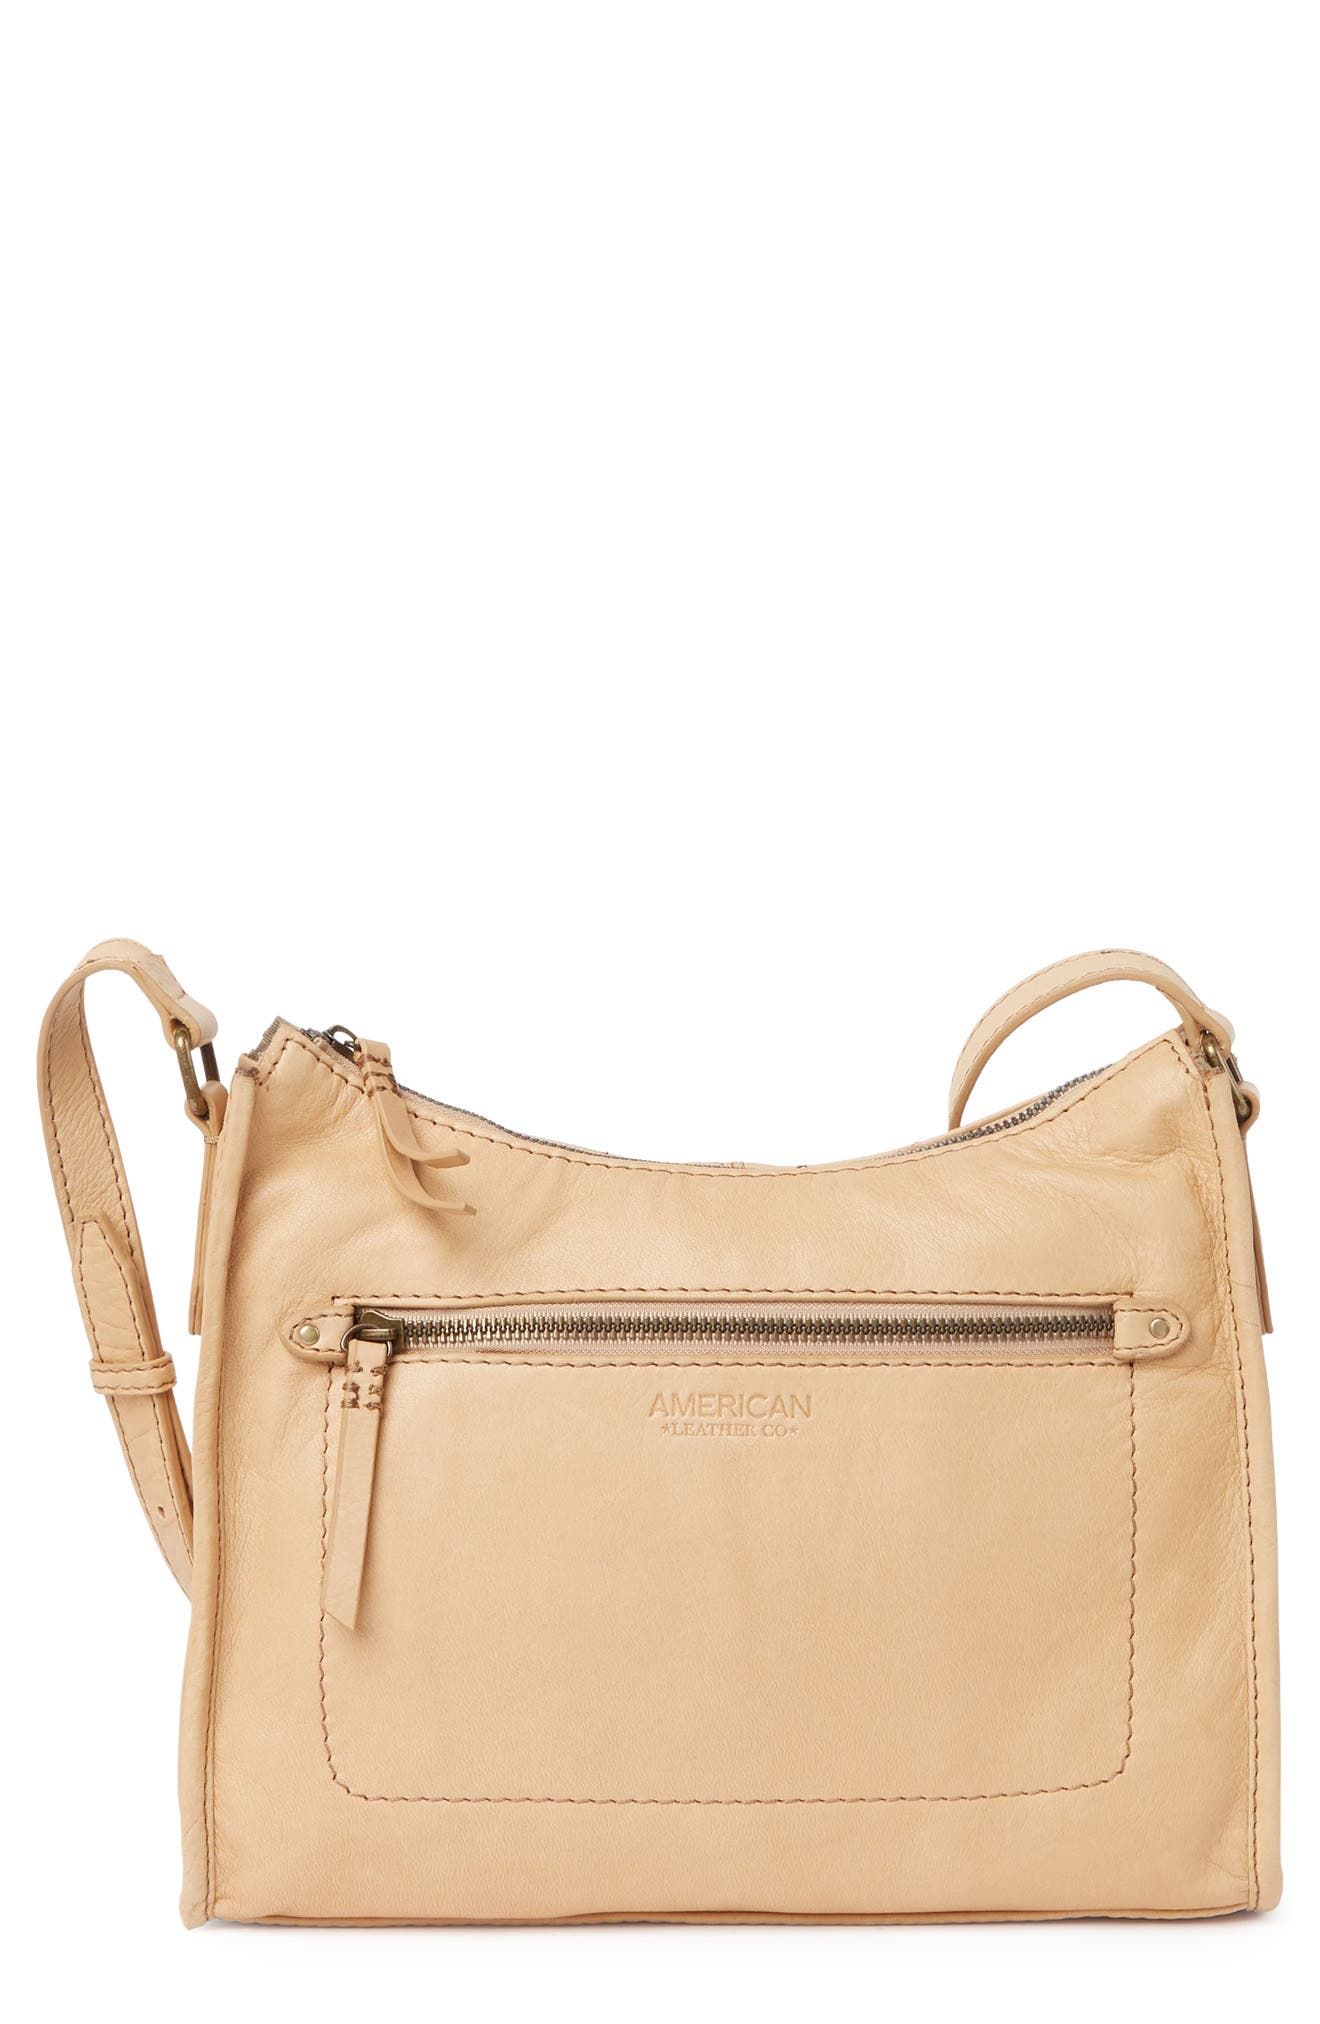 American Leather Co. Chadron Smooth Leather Crossbody In Sand Smooth